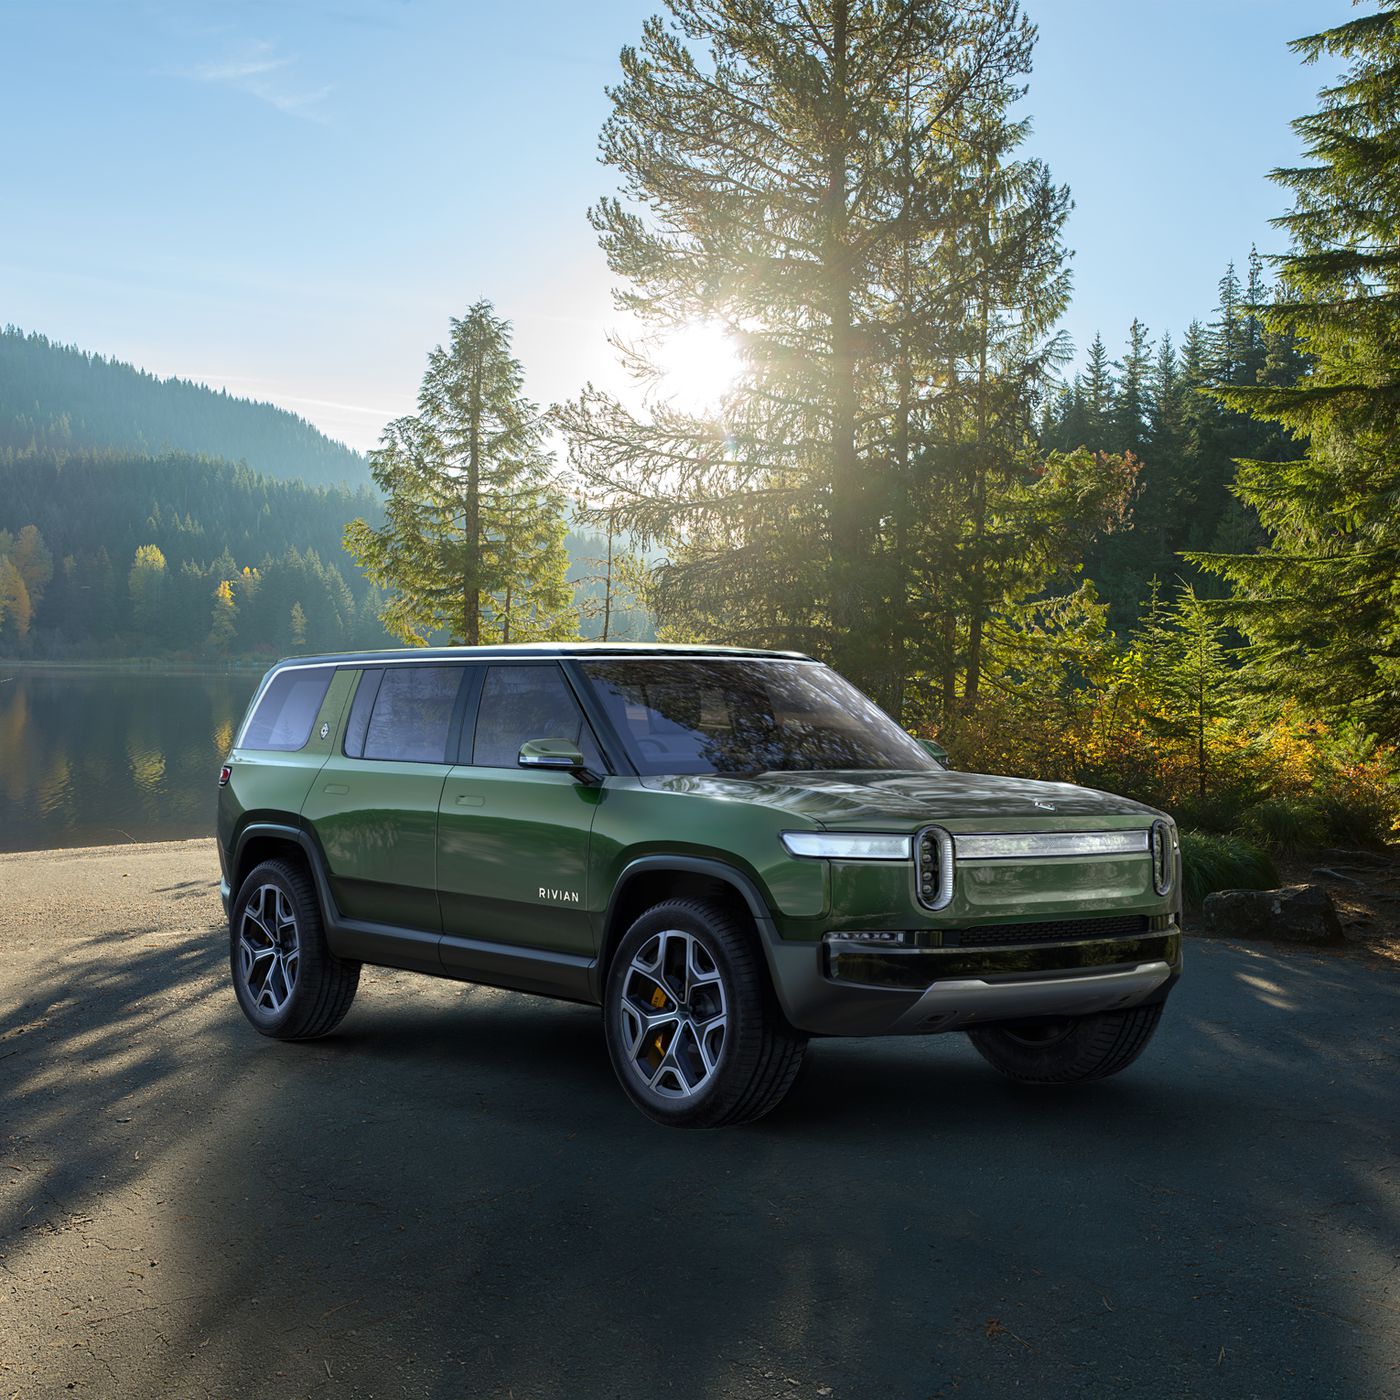 Featured image for “You should be excited about the Rivian R1S”